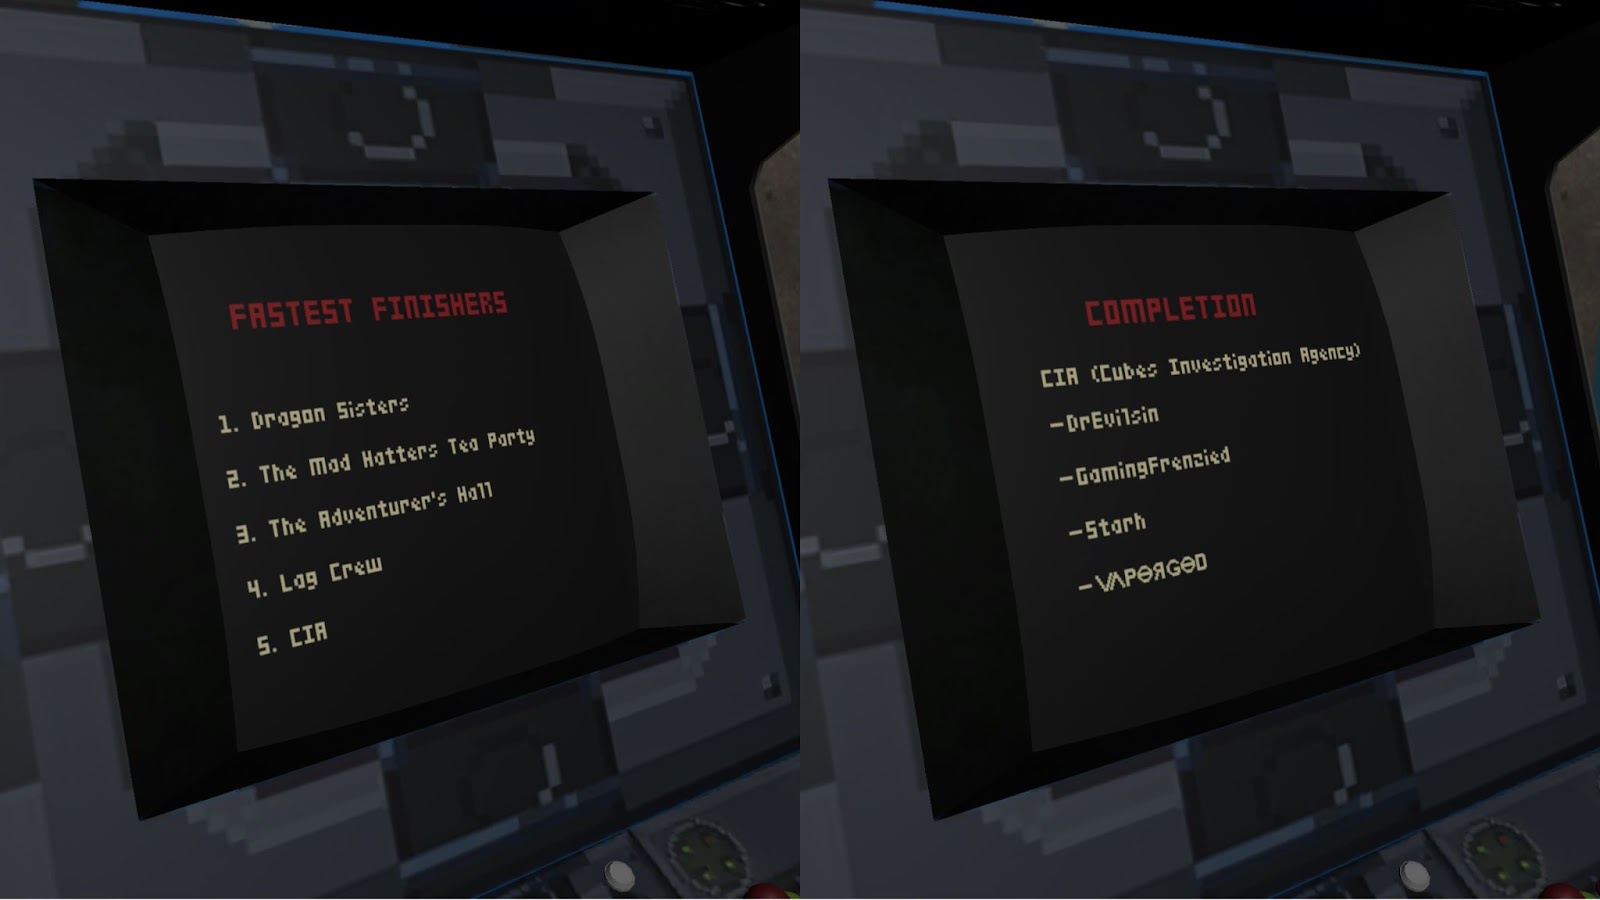 two captures from a different VRChat world showing records for completion of the world called CUBES. The first image shows fastest finishers from top to bottom as Dragon Sisters, Mad Hatters Tea Party, The Adventurer's Hall, Lag Crew, CIA (Cubes Intelligence Agency) and the second image shows members of the CIA, which are DrEvilSin, GamingFrenzied, Starh, and varporgod in stylized font